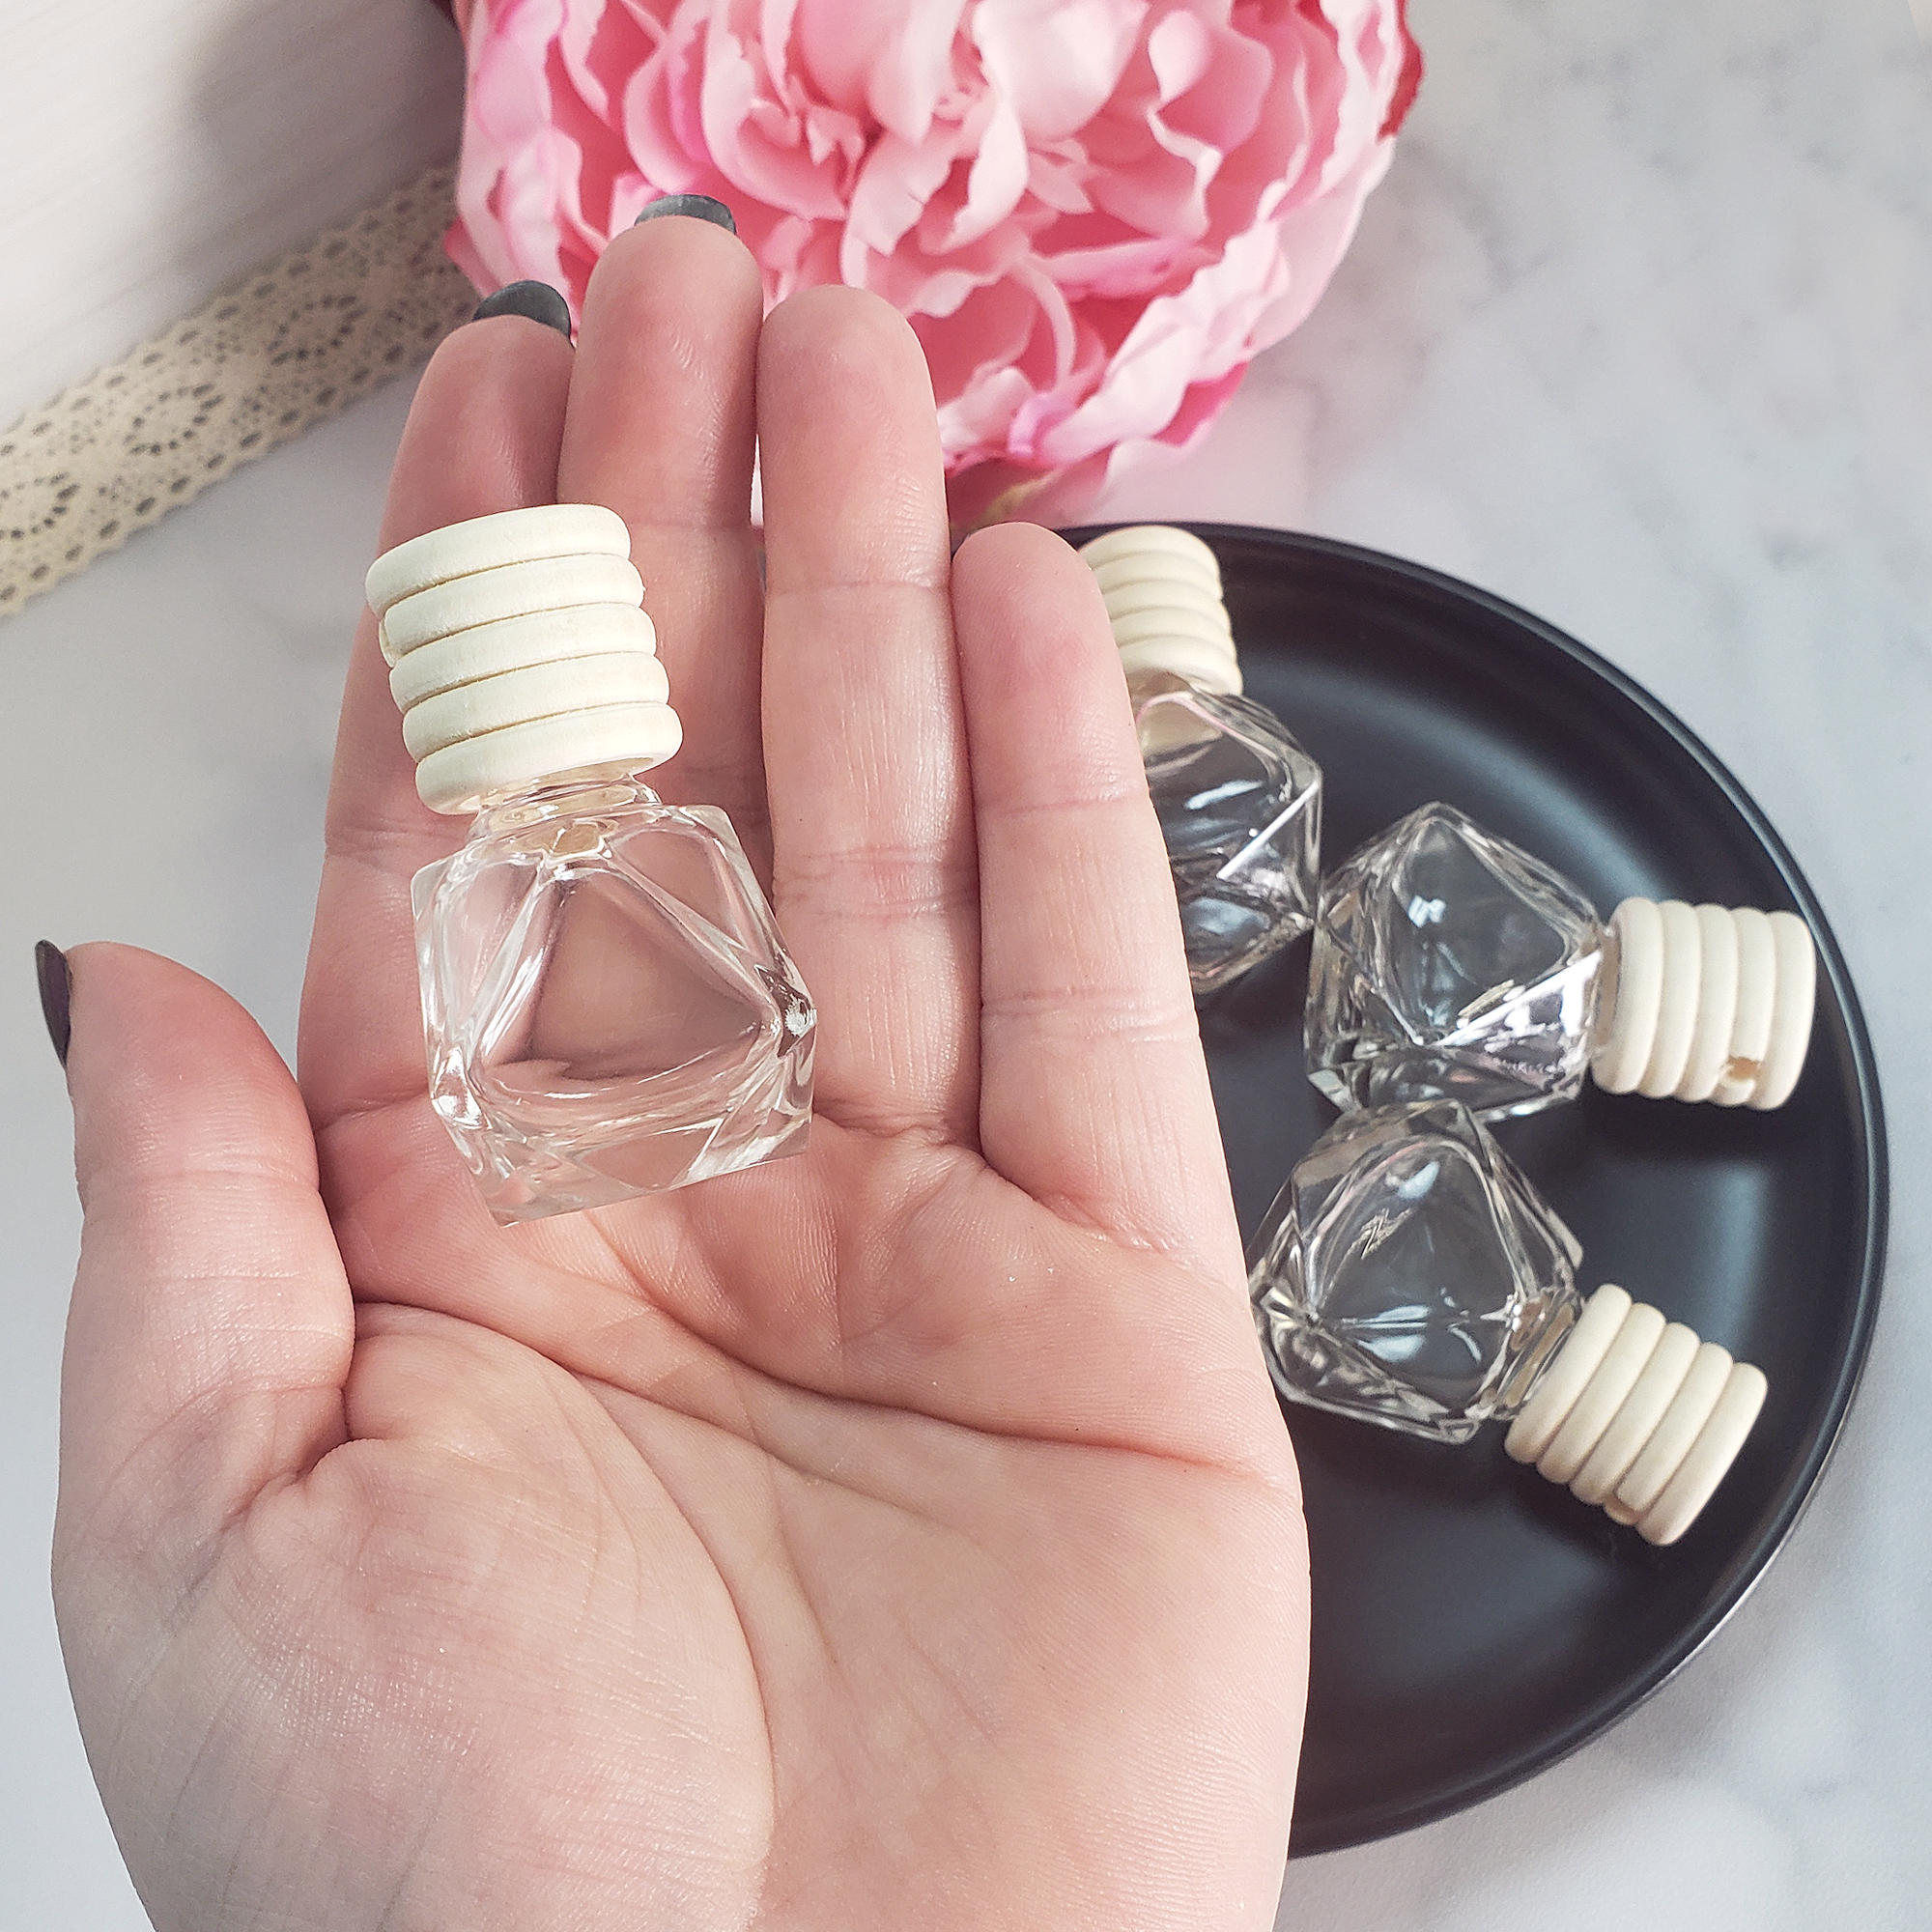 Glass Bottle Pendant | Empty Spell Jar Bottle for Essential Oils, Herbs, & Crystal Chips - Empty Potion Bottles for Cosplaying, Spirituality, and More!